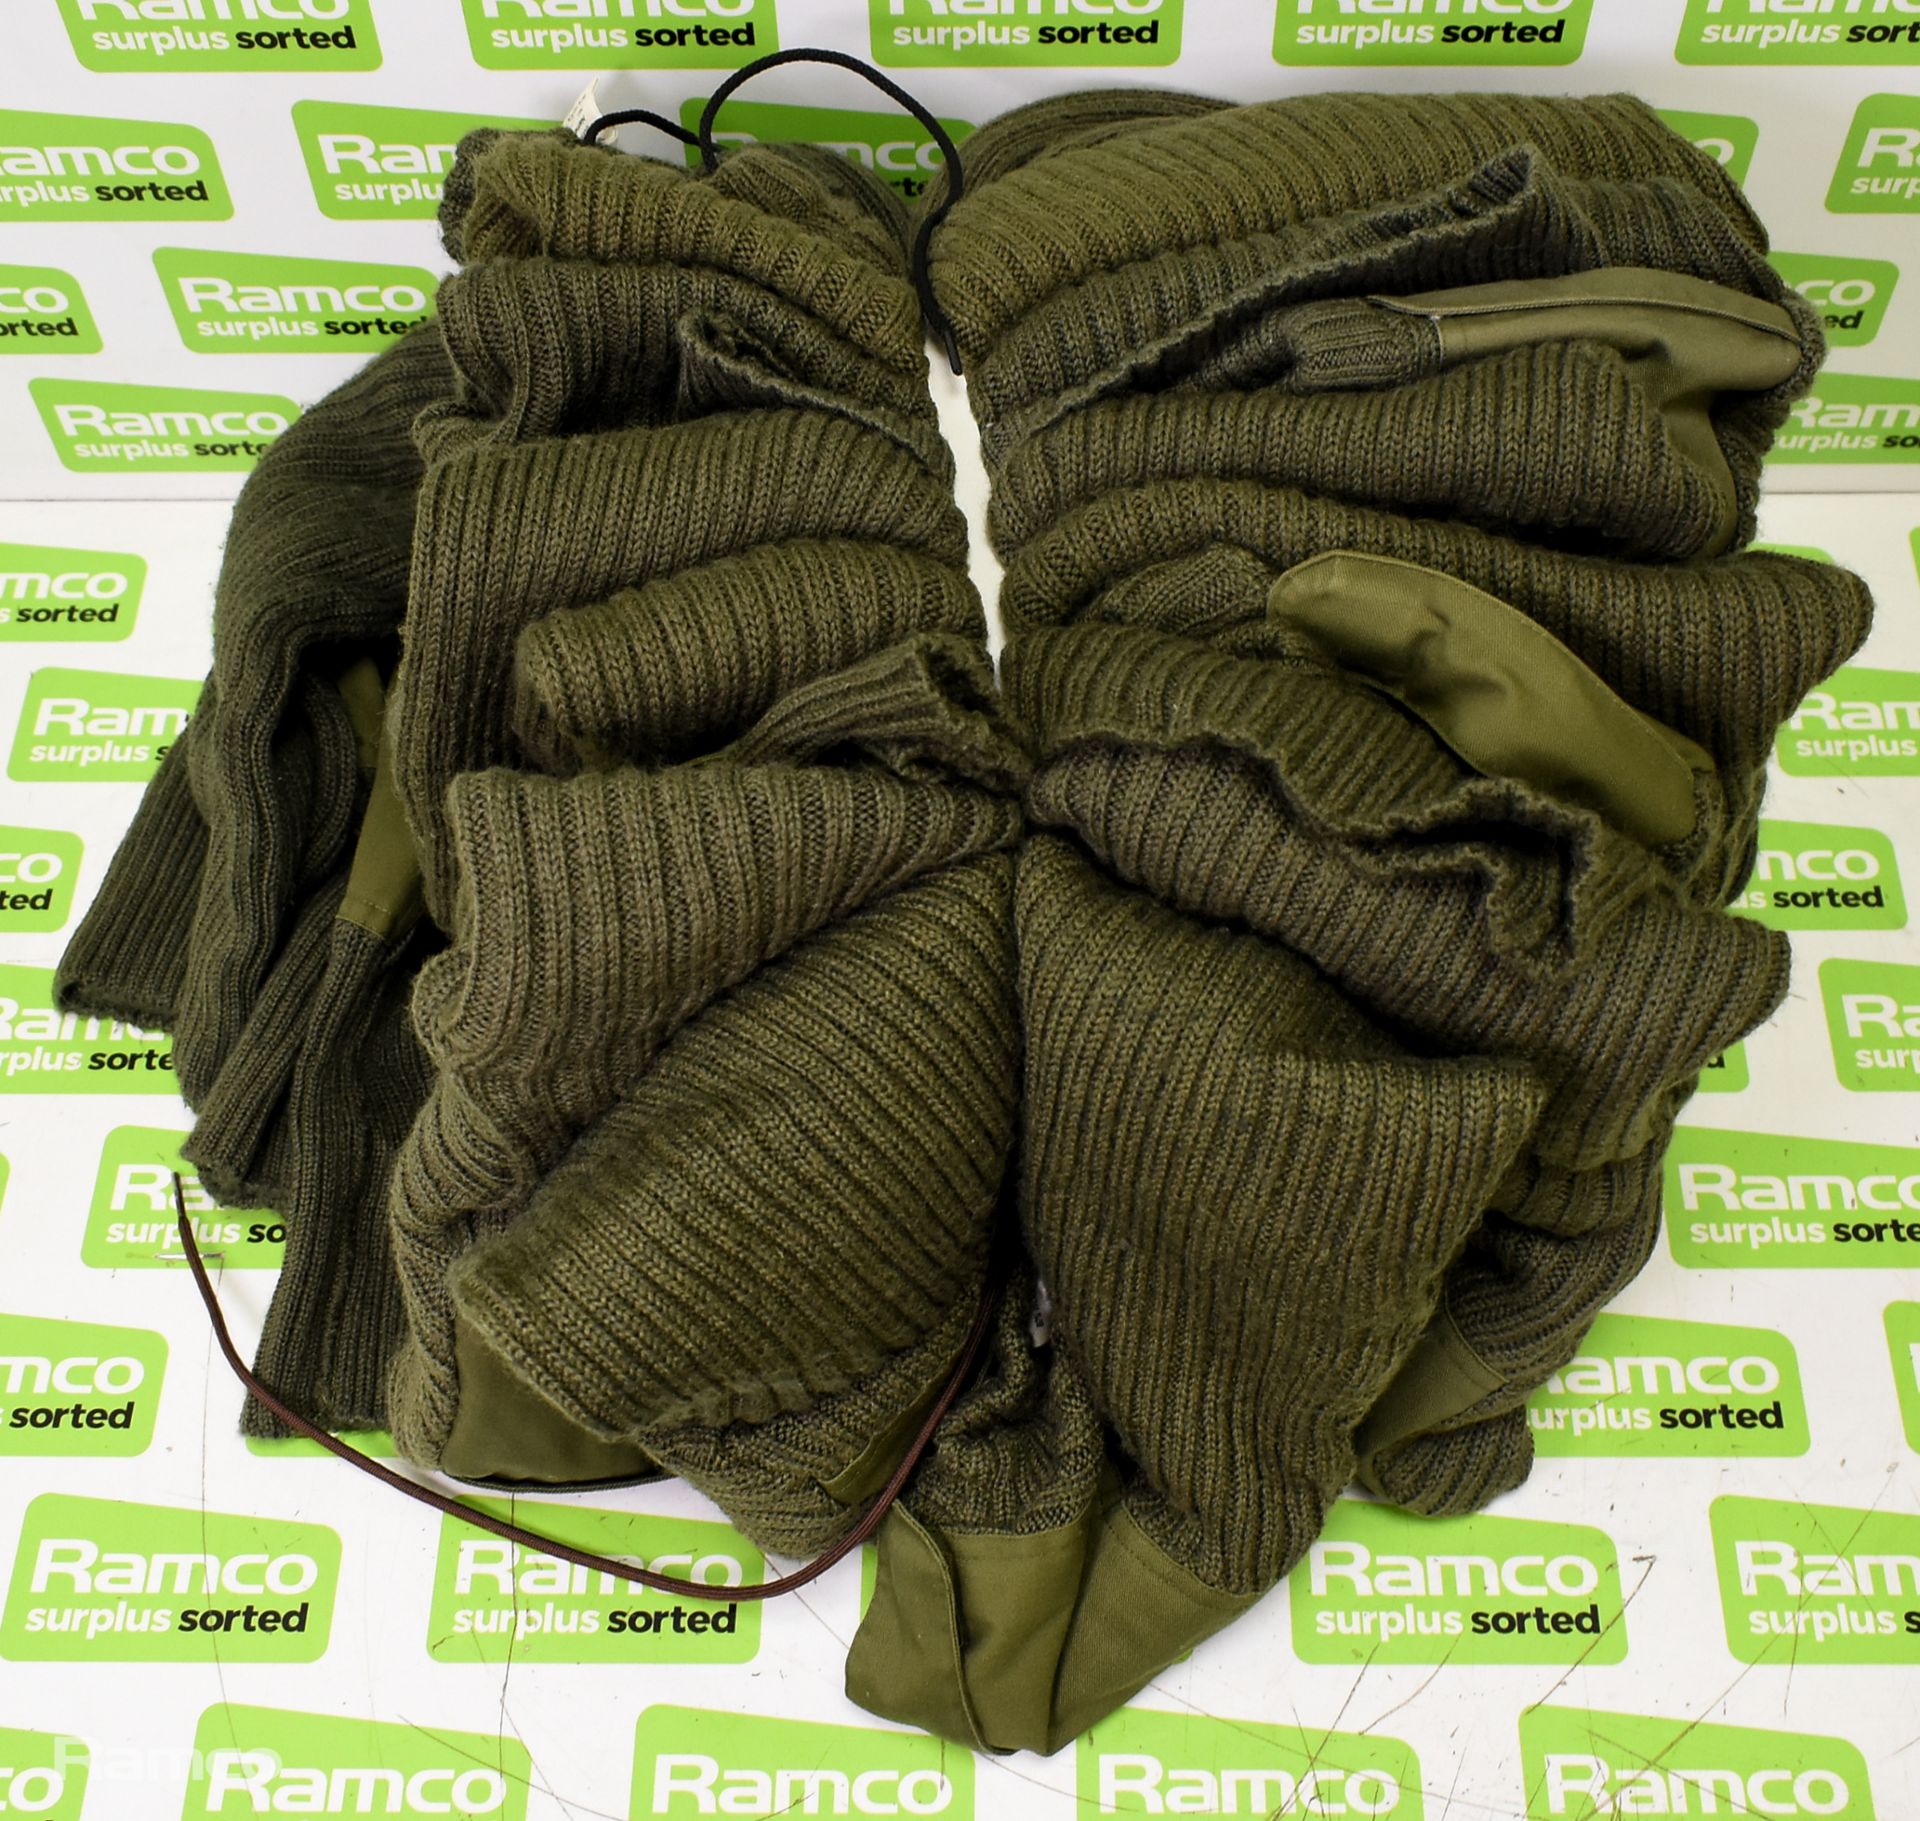 100x British Army wool jerseys - Olive - mixed grades and sizes - Image 9 of 9